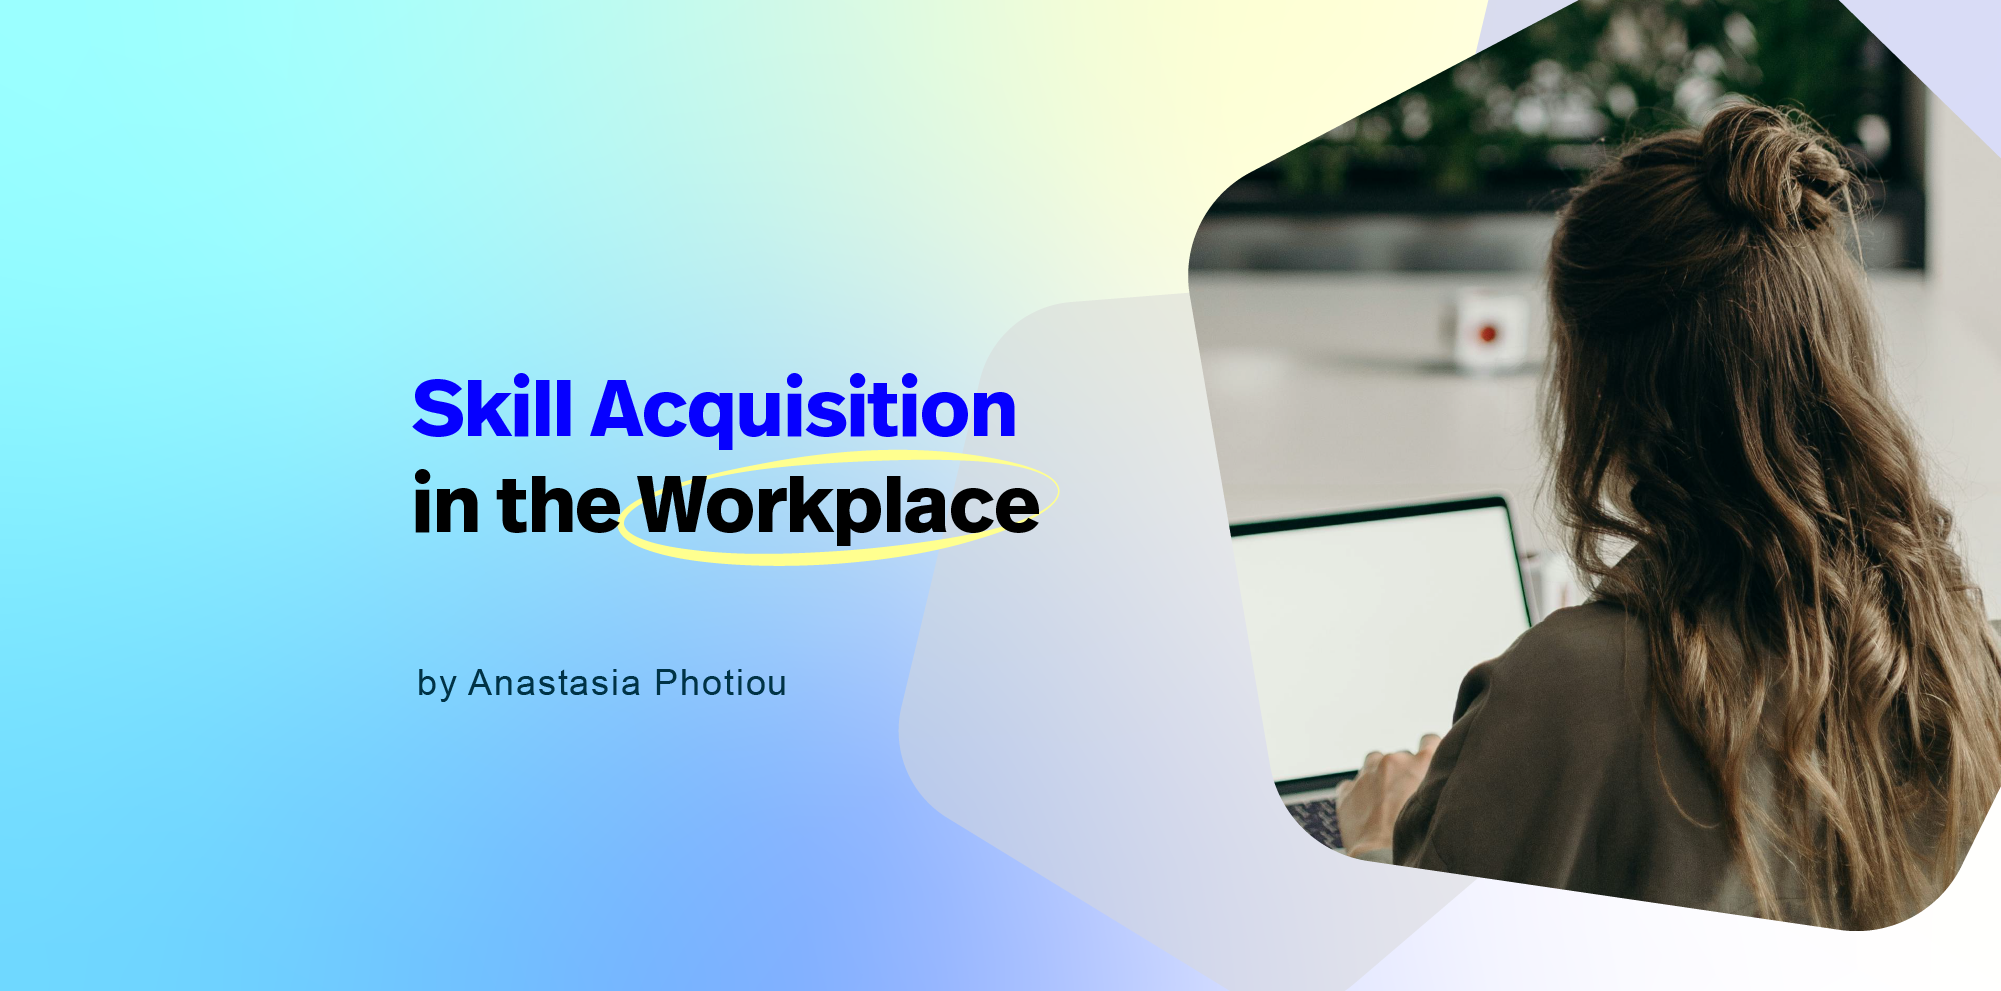 Skill Acquisition in the Workplace